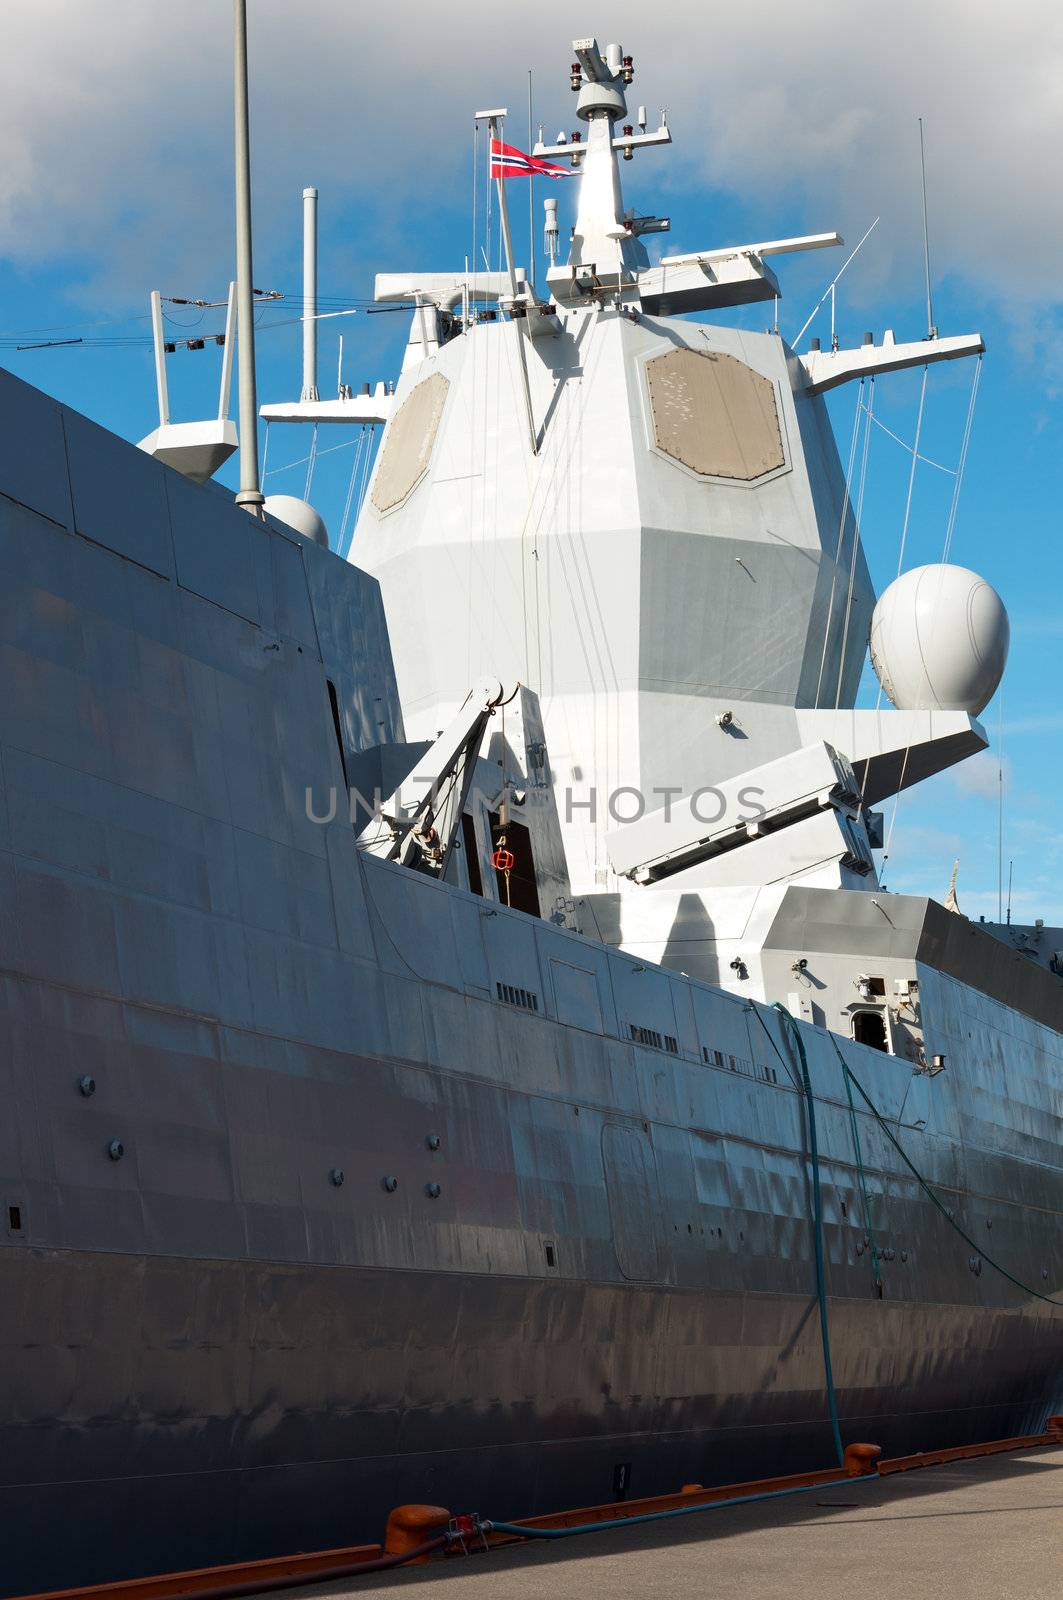 Military ship with radar system at the pier